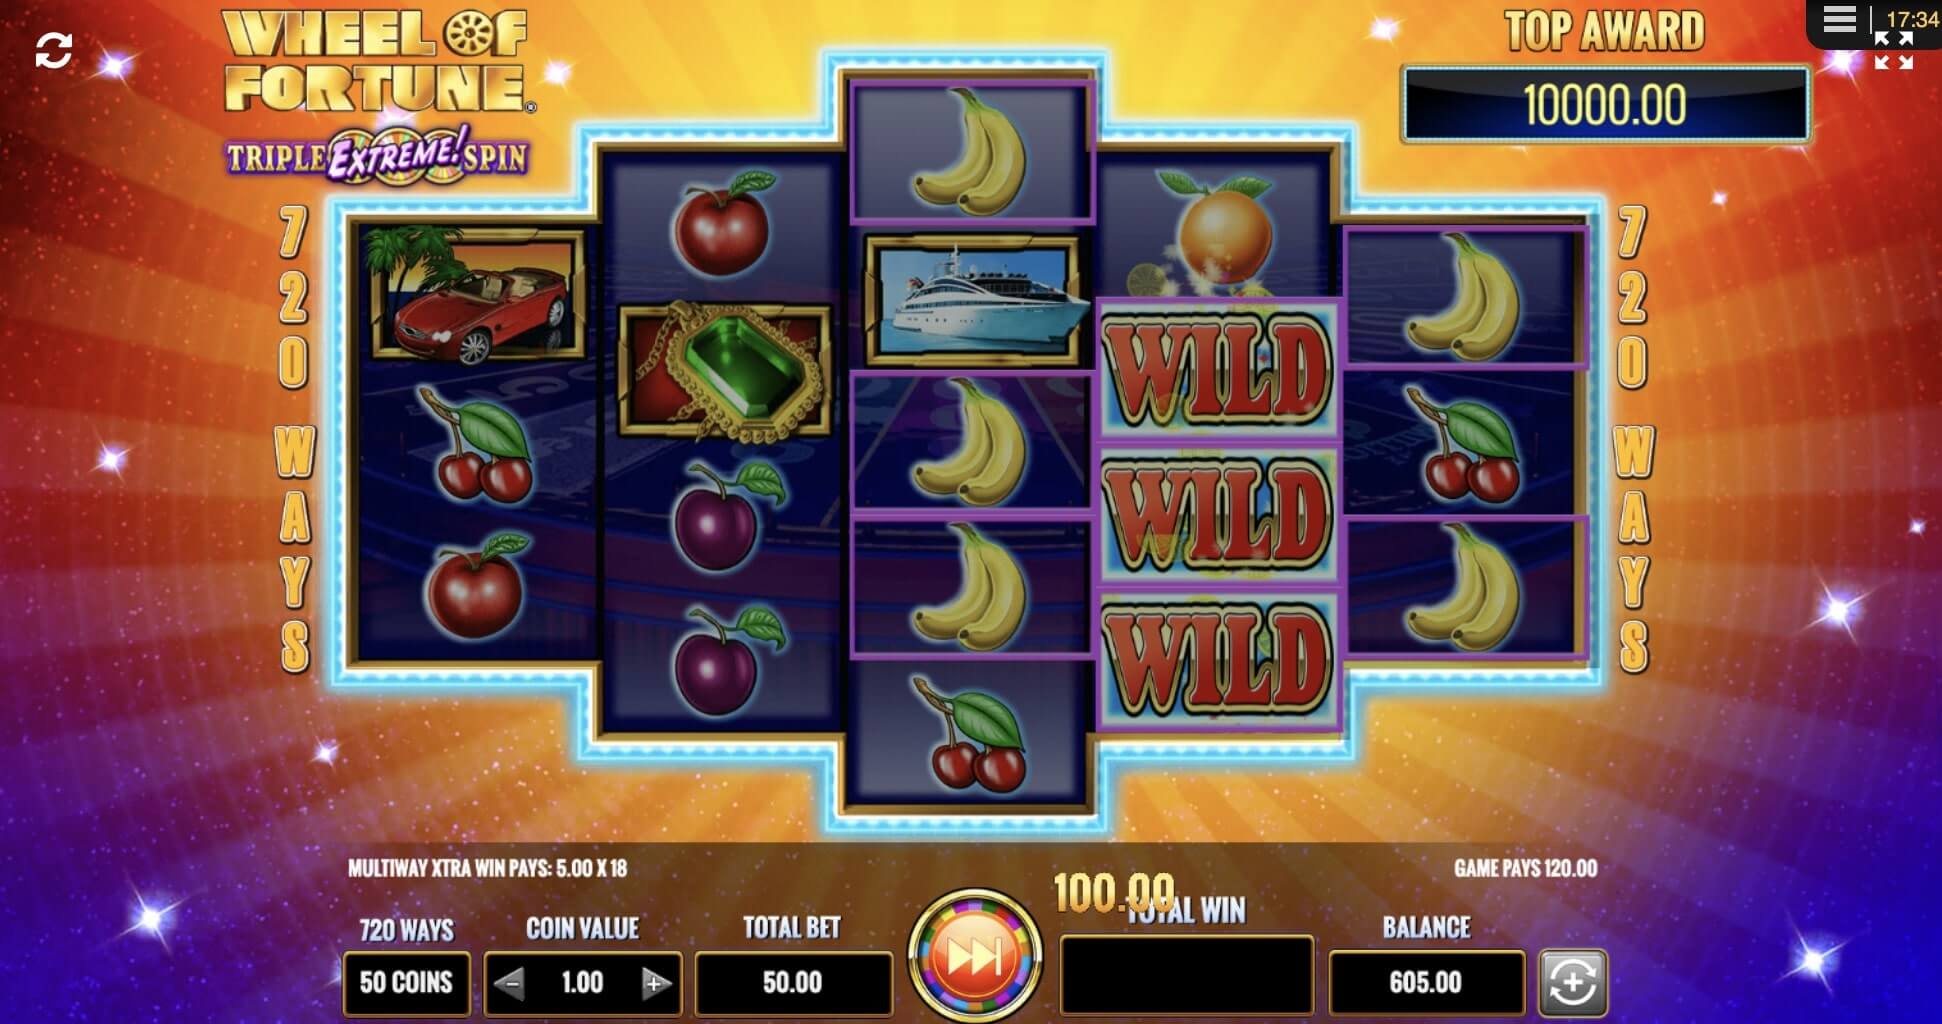 Wheel of Fortune Slot by IGT Gameplay